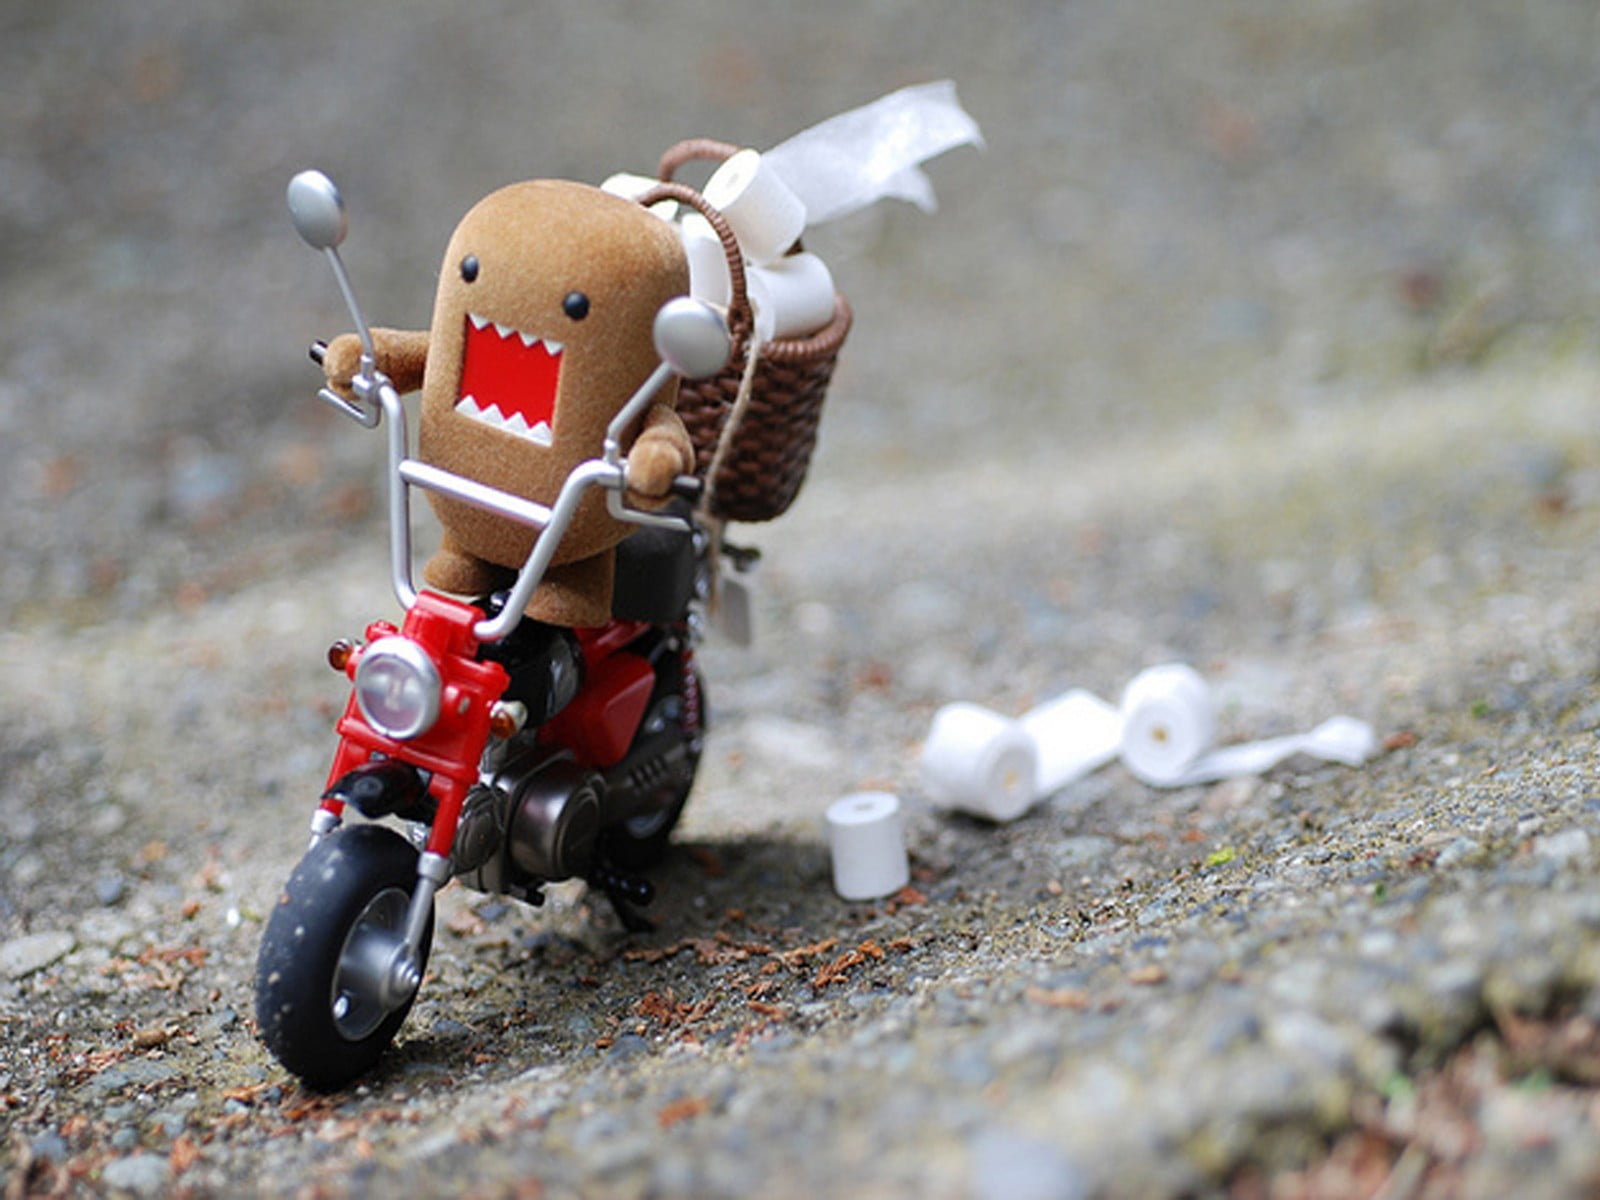 Domo riding motorcycle toy, humor, motorcycle, toys, toilet paper